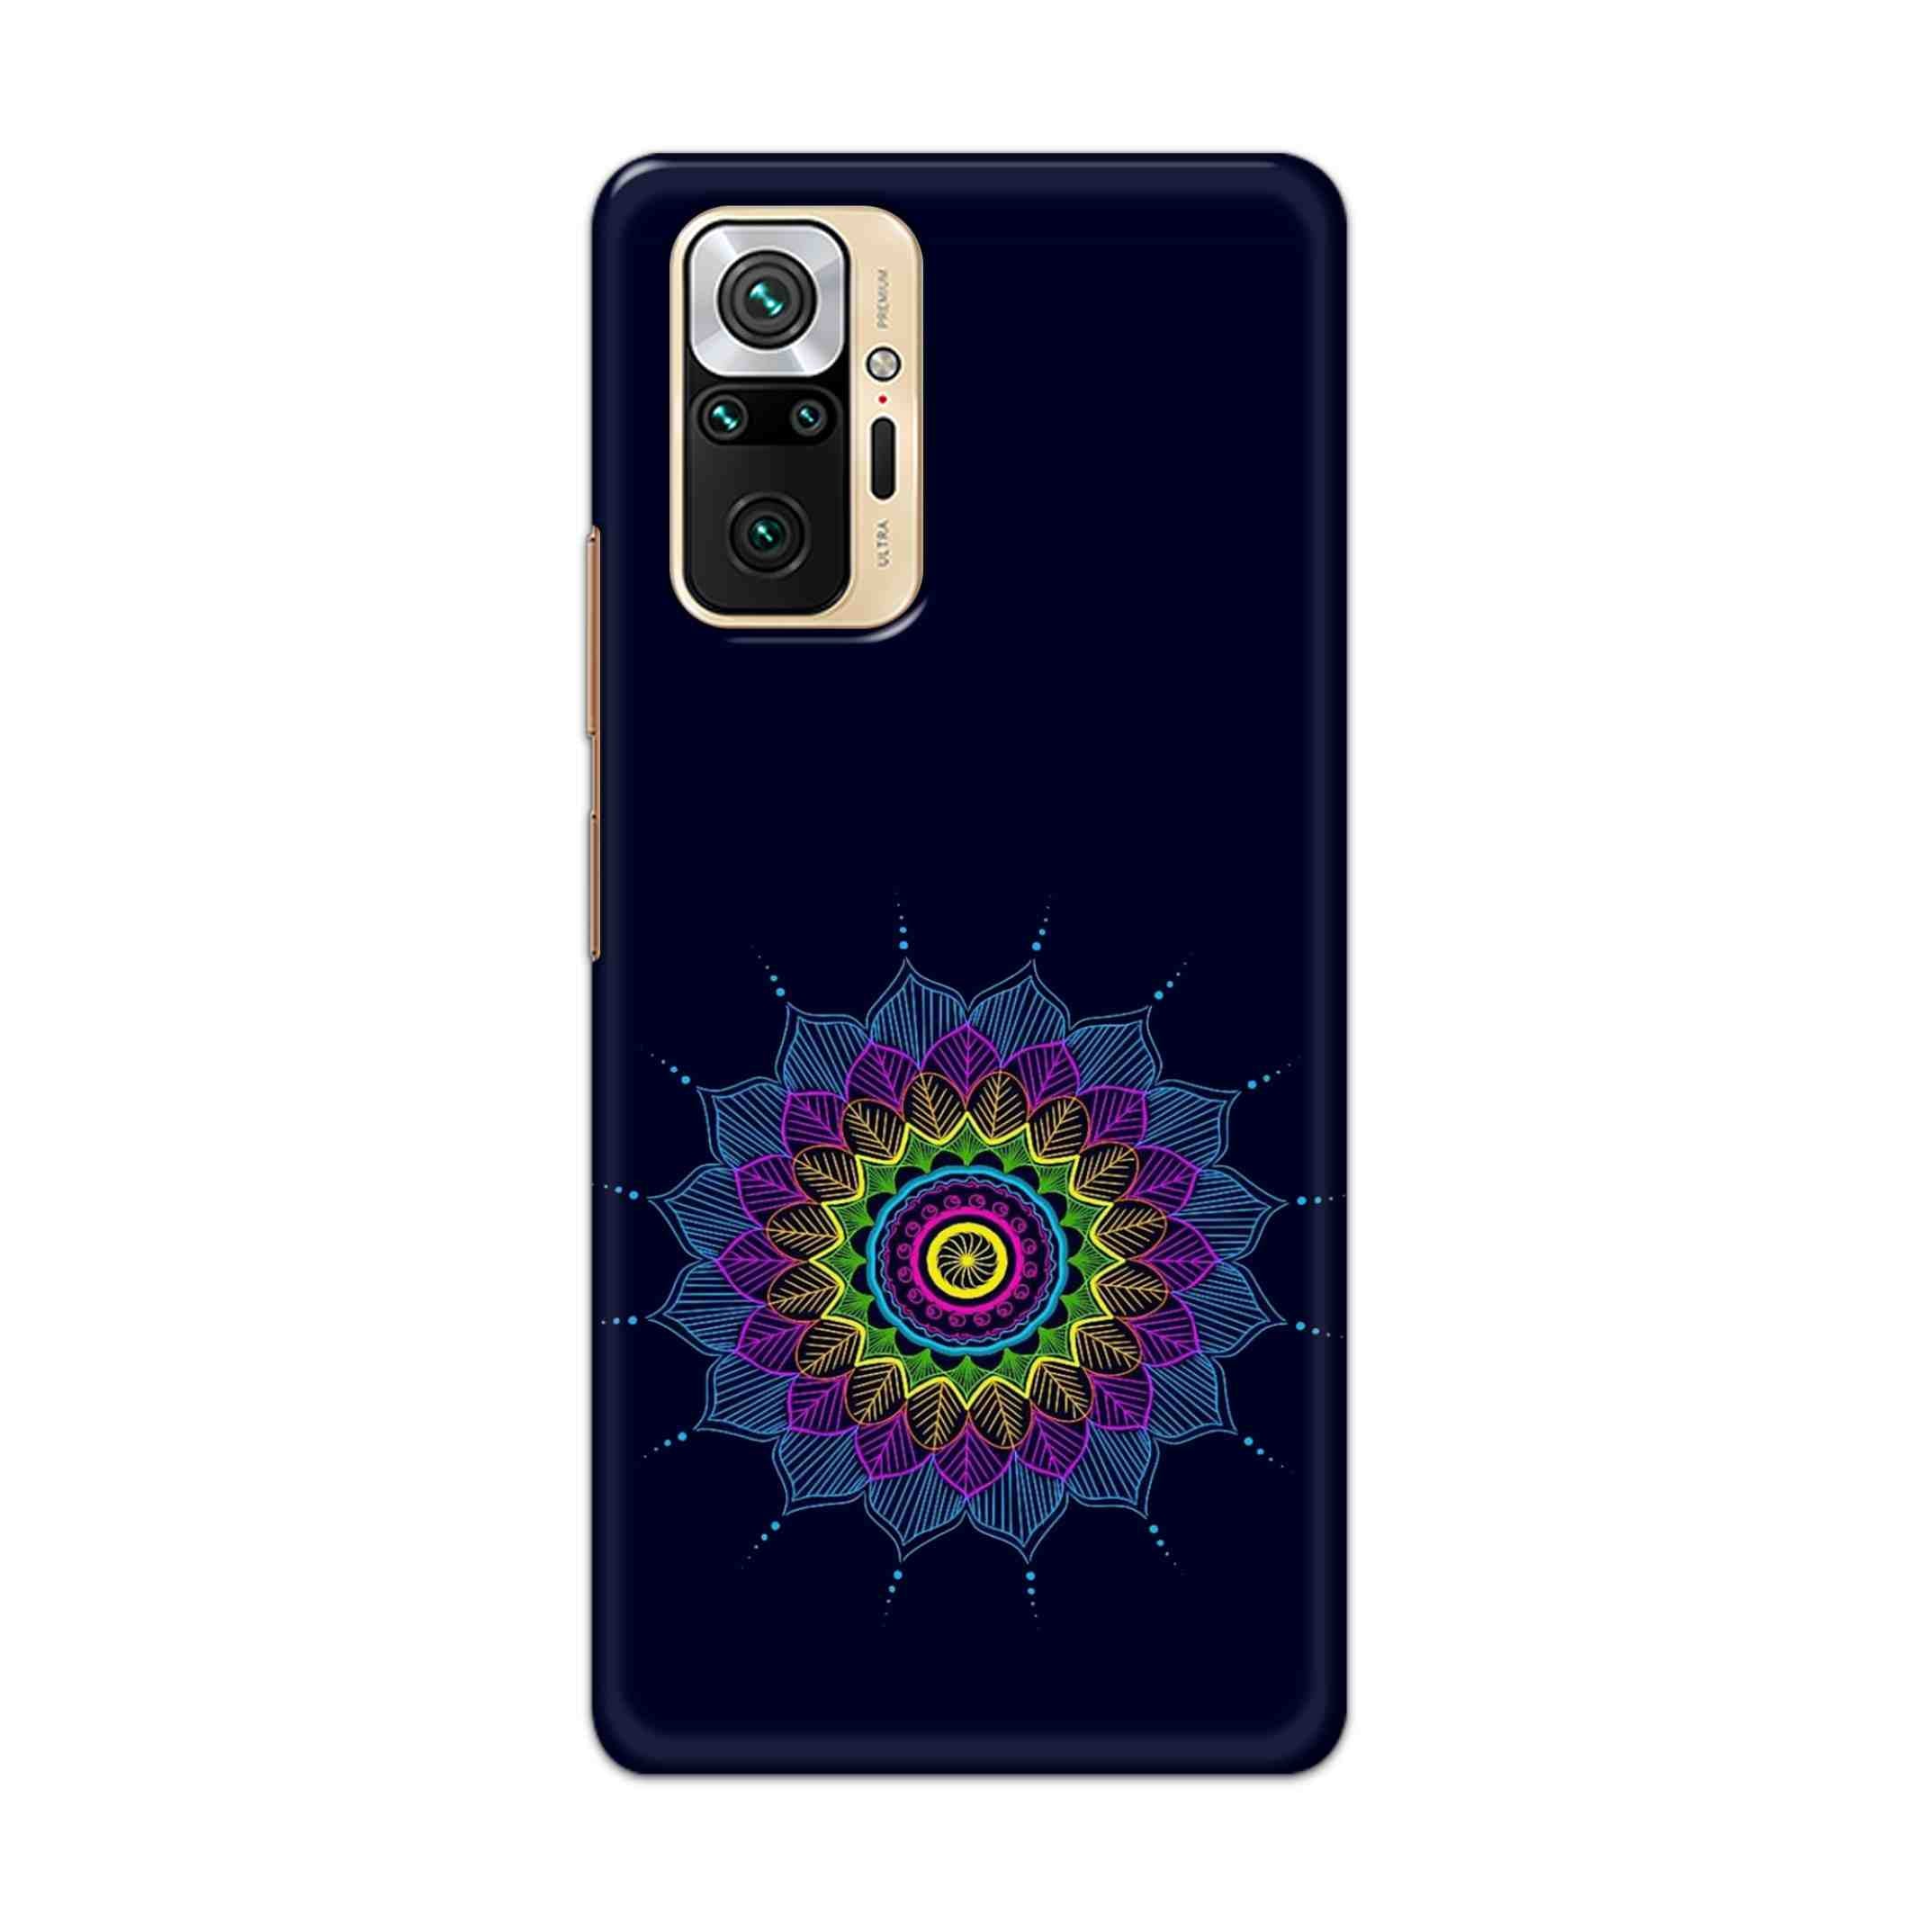 Buy Jung And Mandalas Hard Back Mobile Phone Case Cover For Redmi Note 10 Pro Online